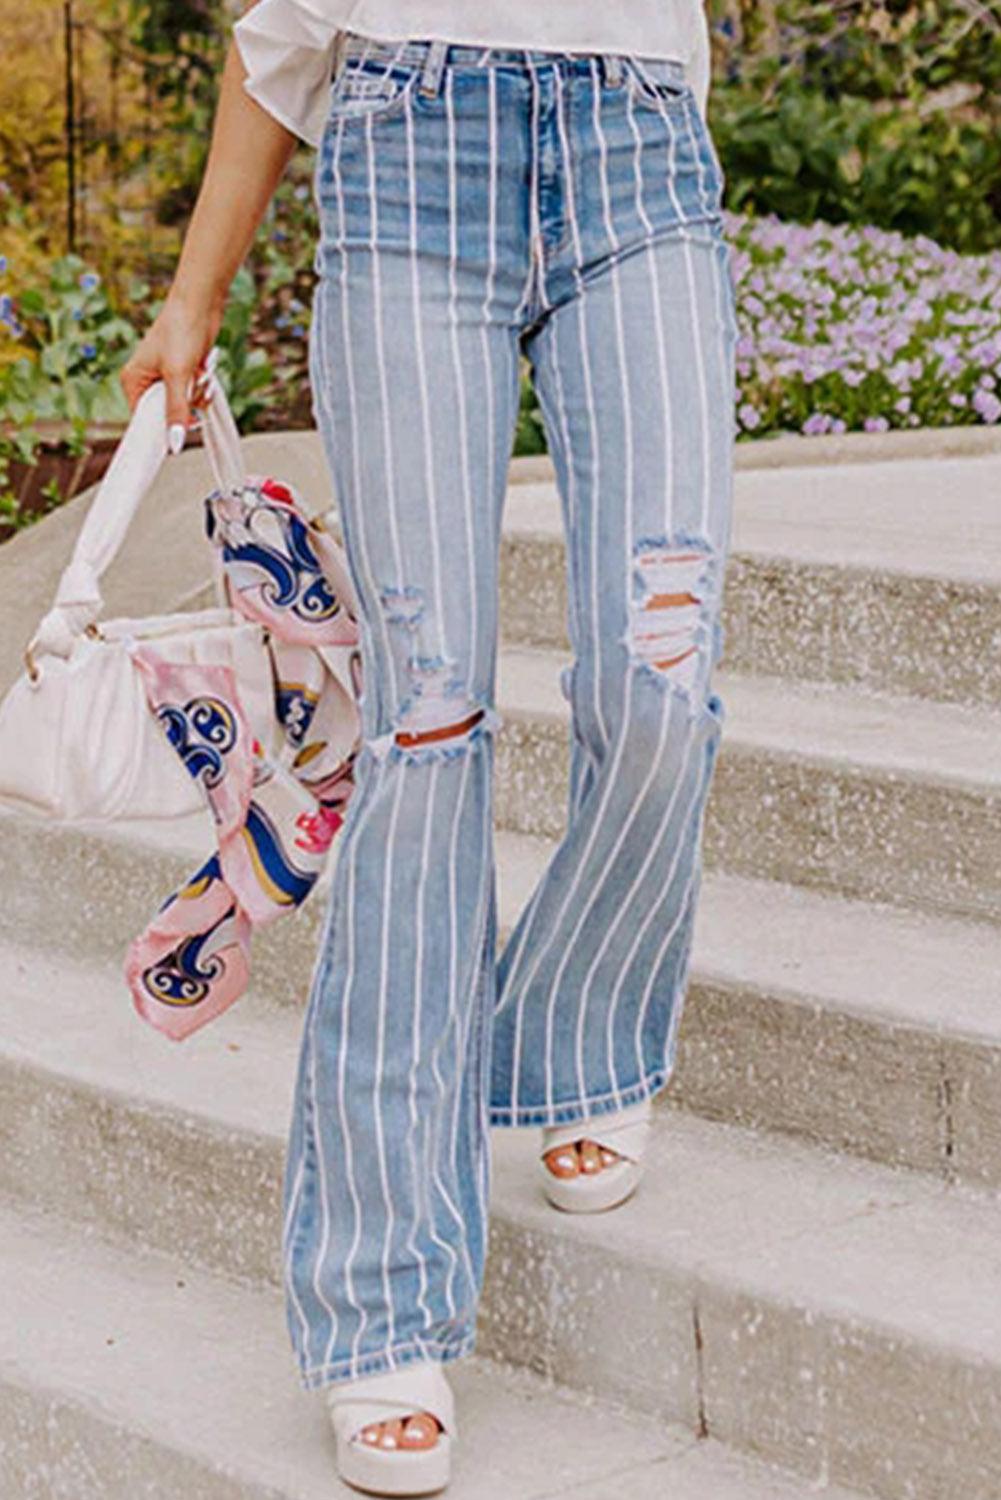 Sky Blue Vertical Striped Ripped Flare Jeans - Vesteeto